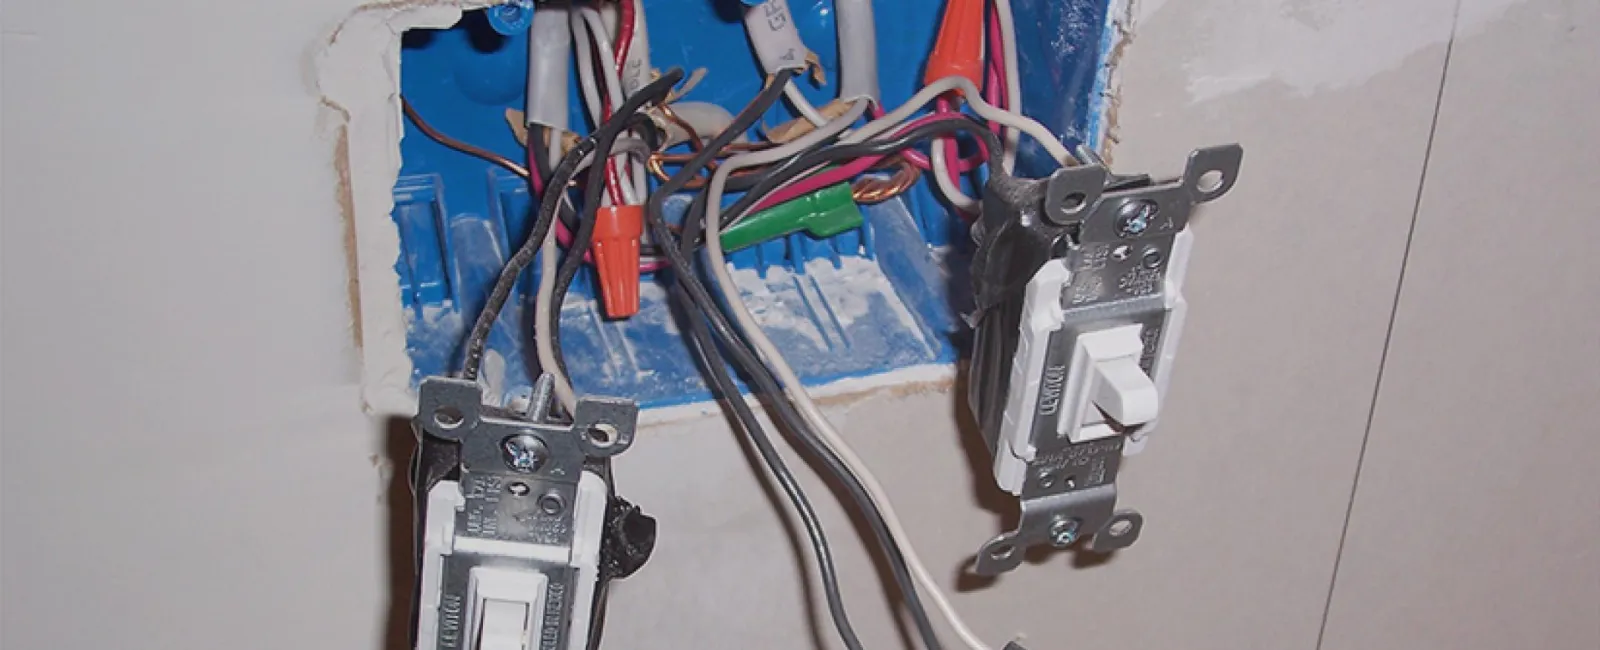 How to Avoid the Most Common Electrical Code Violations